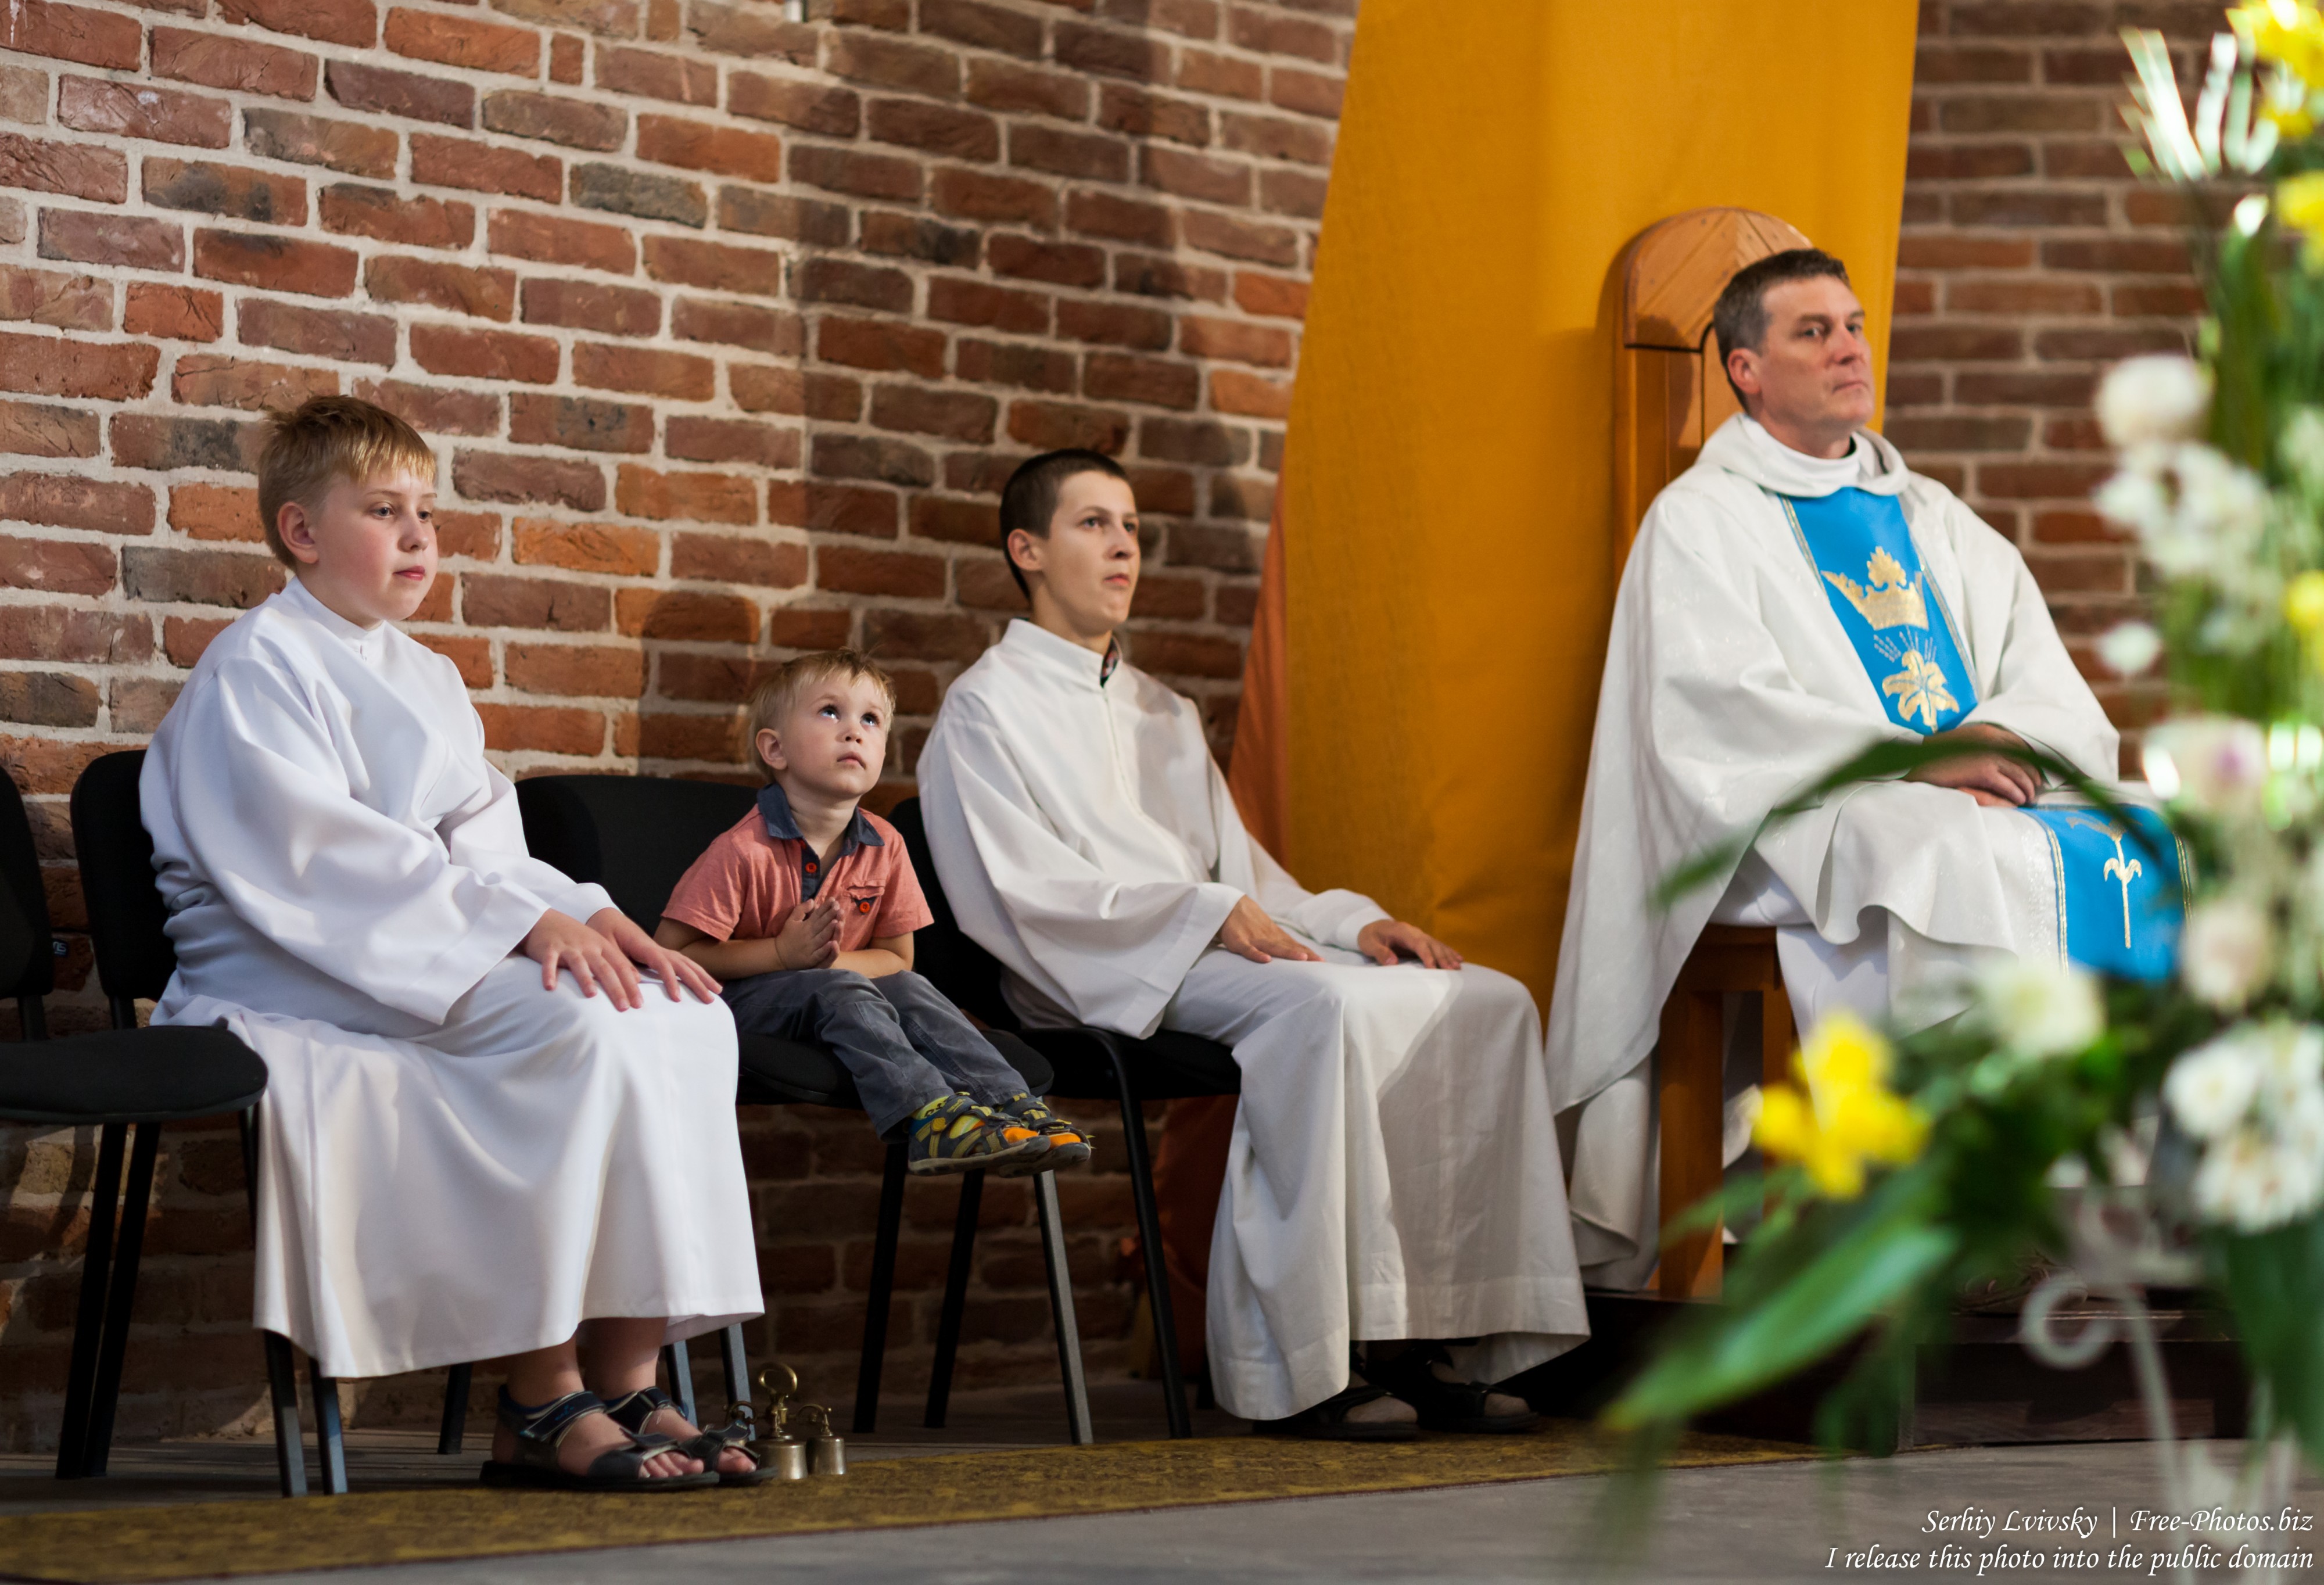 people in a Catholic church in September 2016